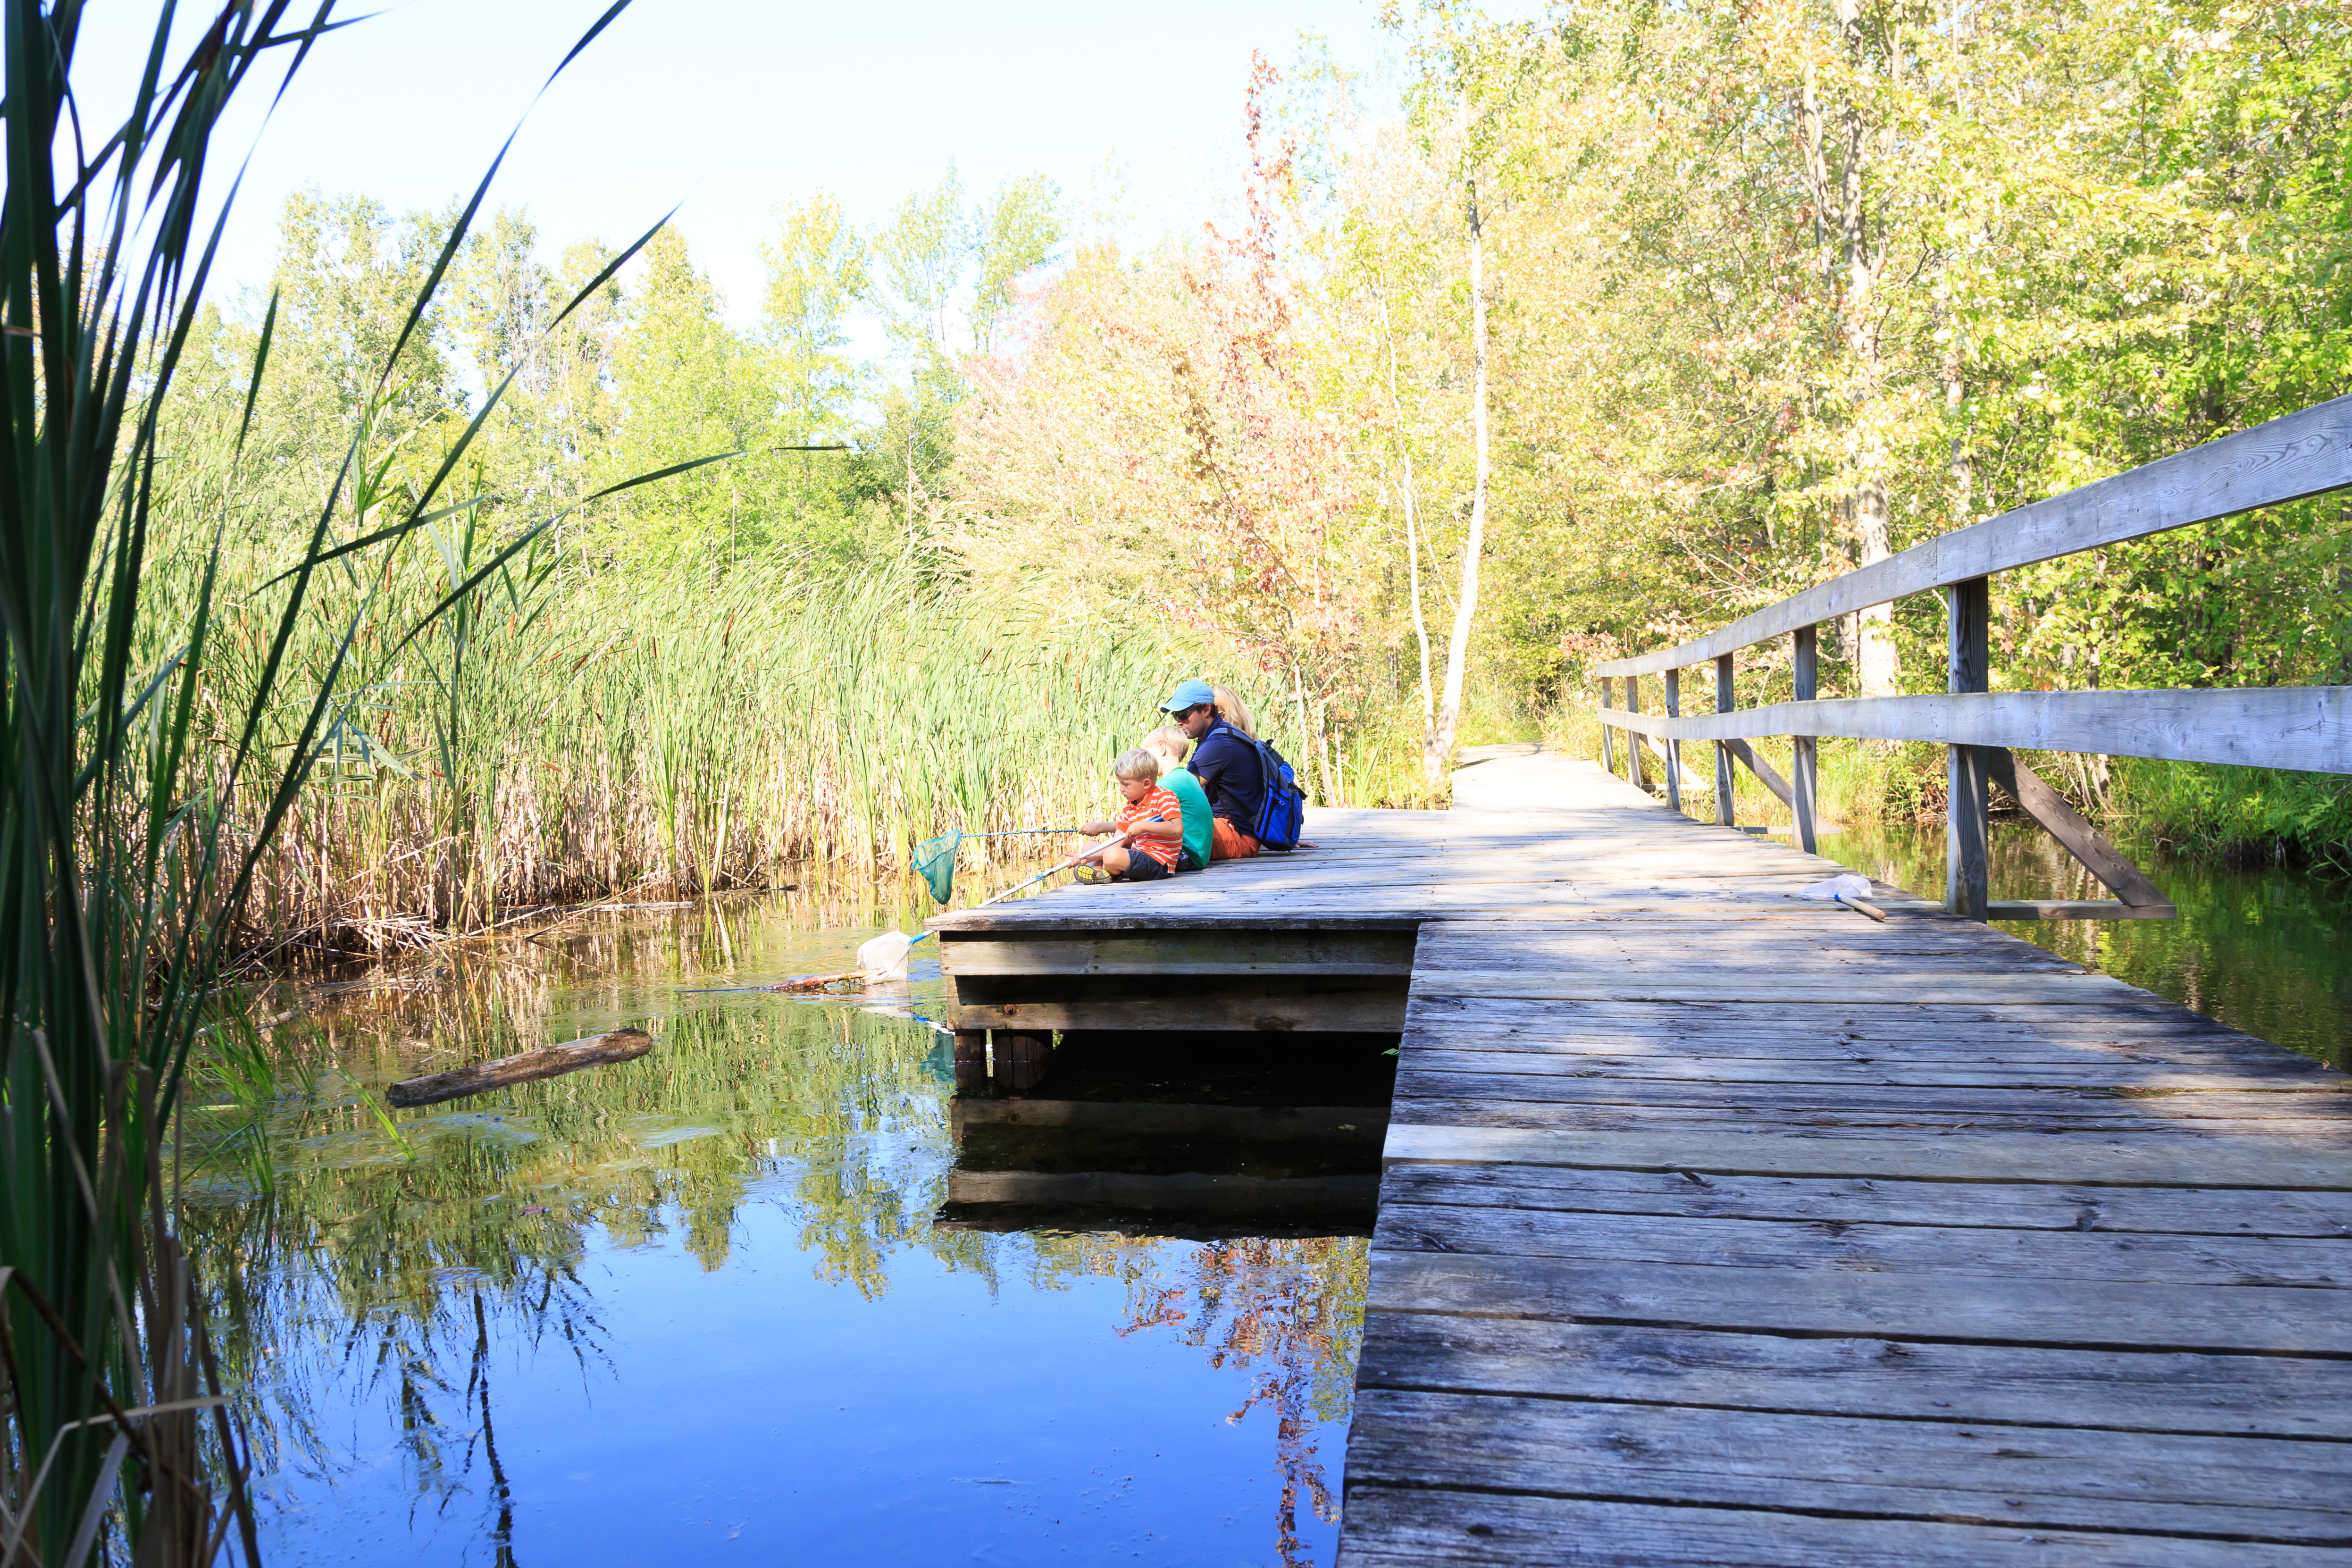 Conservation Area pond provides exceptional fishing opportunities